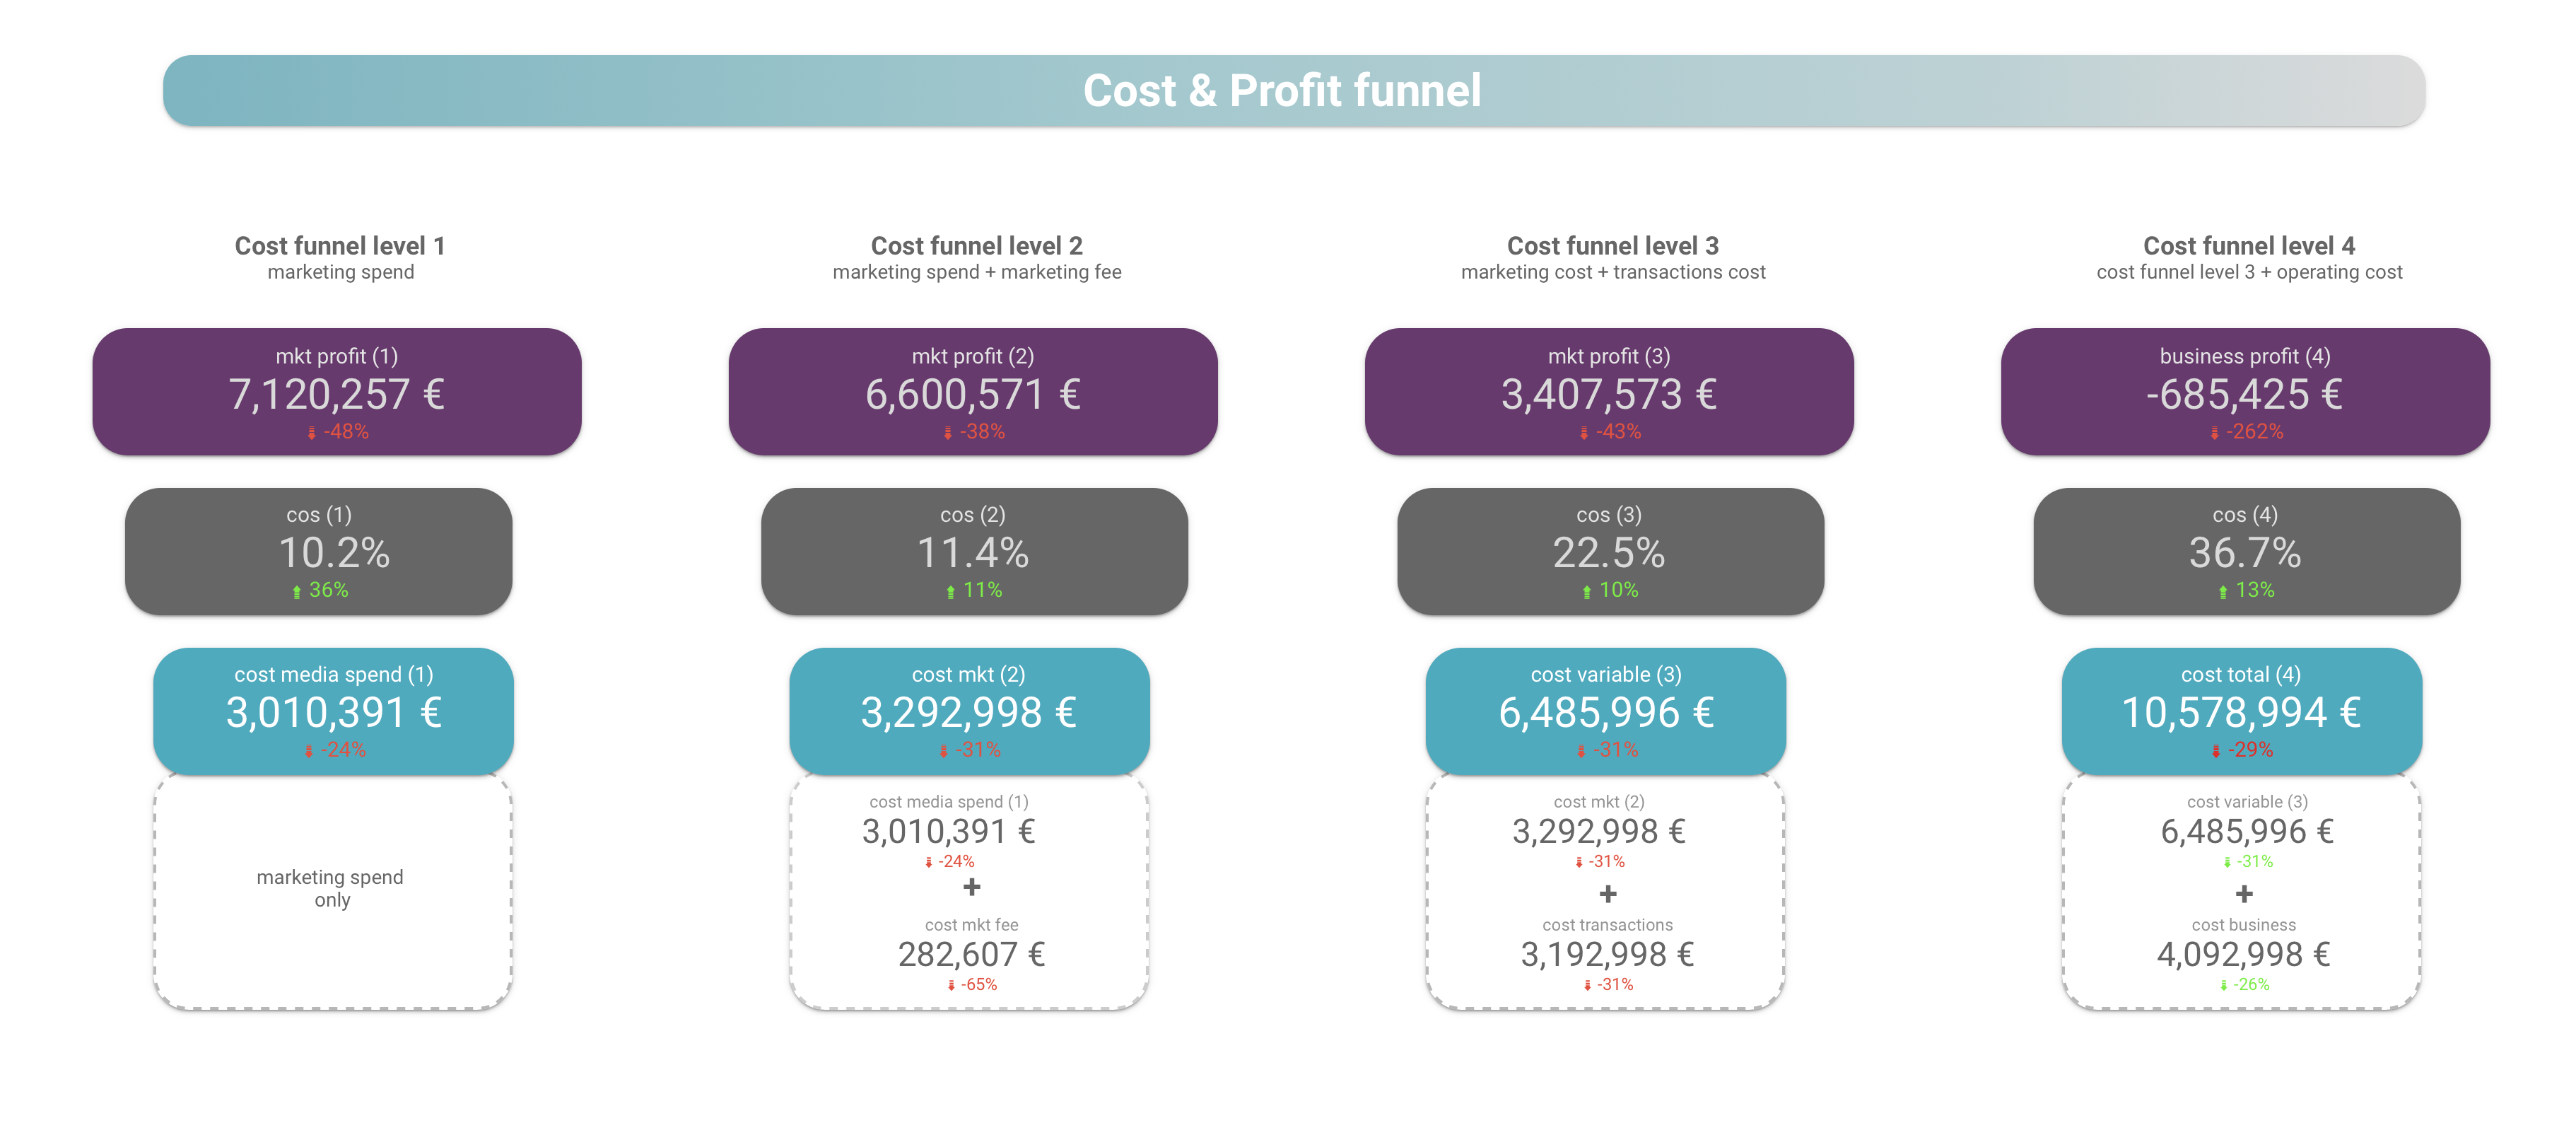 Cost & Profit Funnel - Scalable level of costs